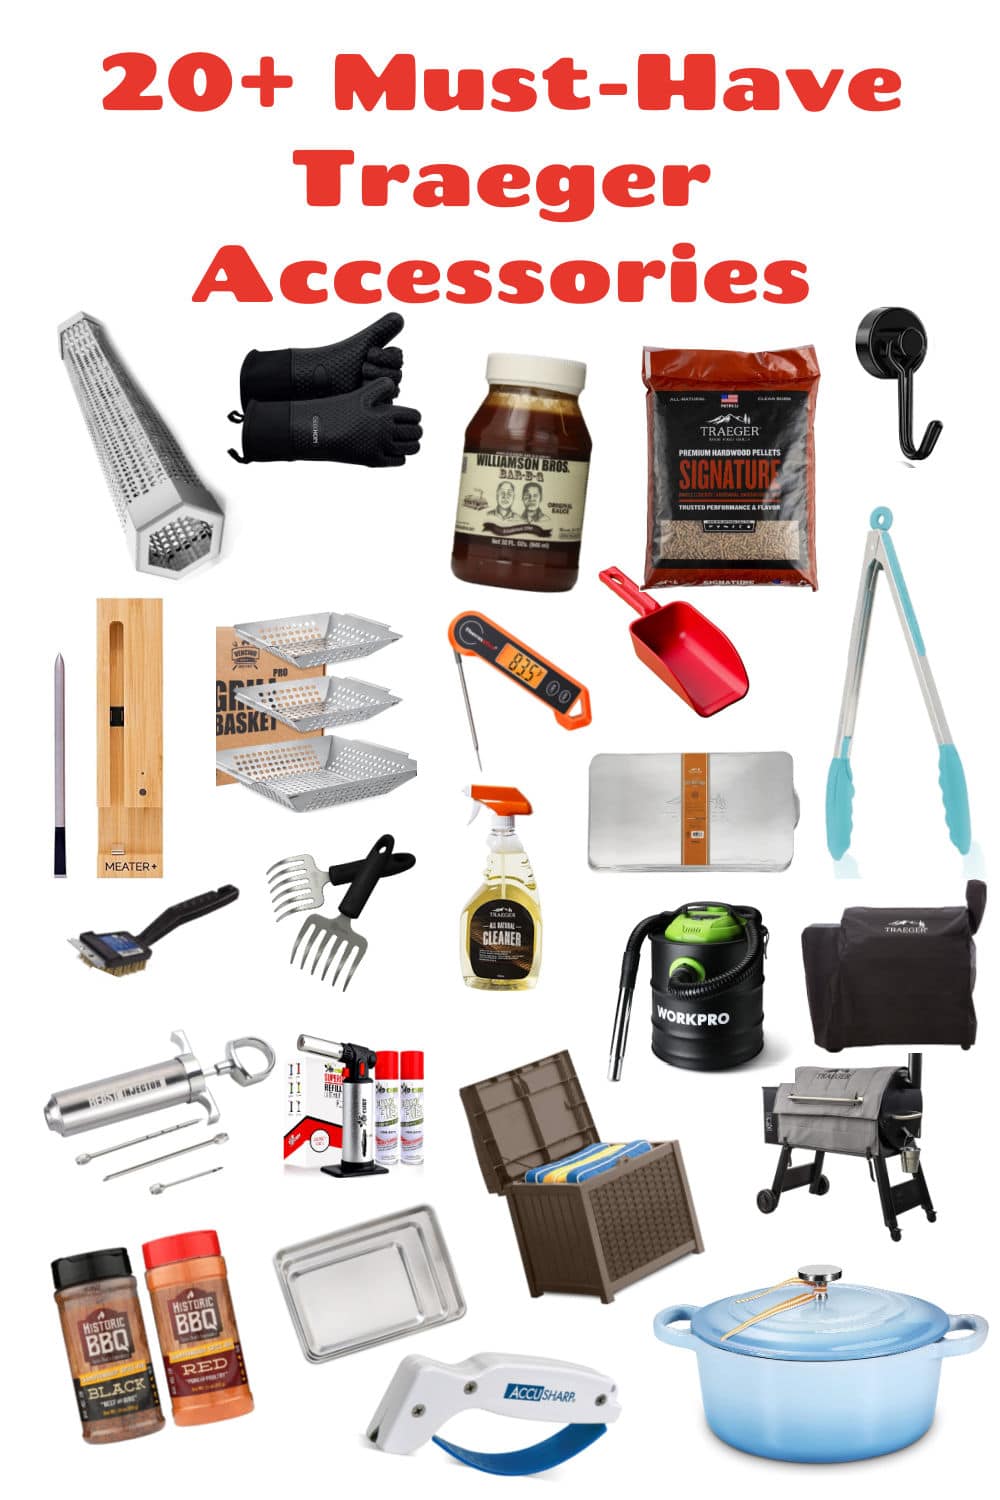 https://www.thefoodhussy.com/wp-content/uploads/2022/06/20-Must-Have-Traeger-Accessories.jpg